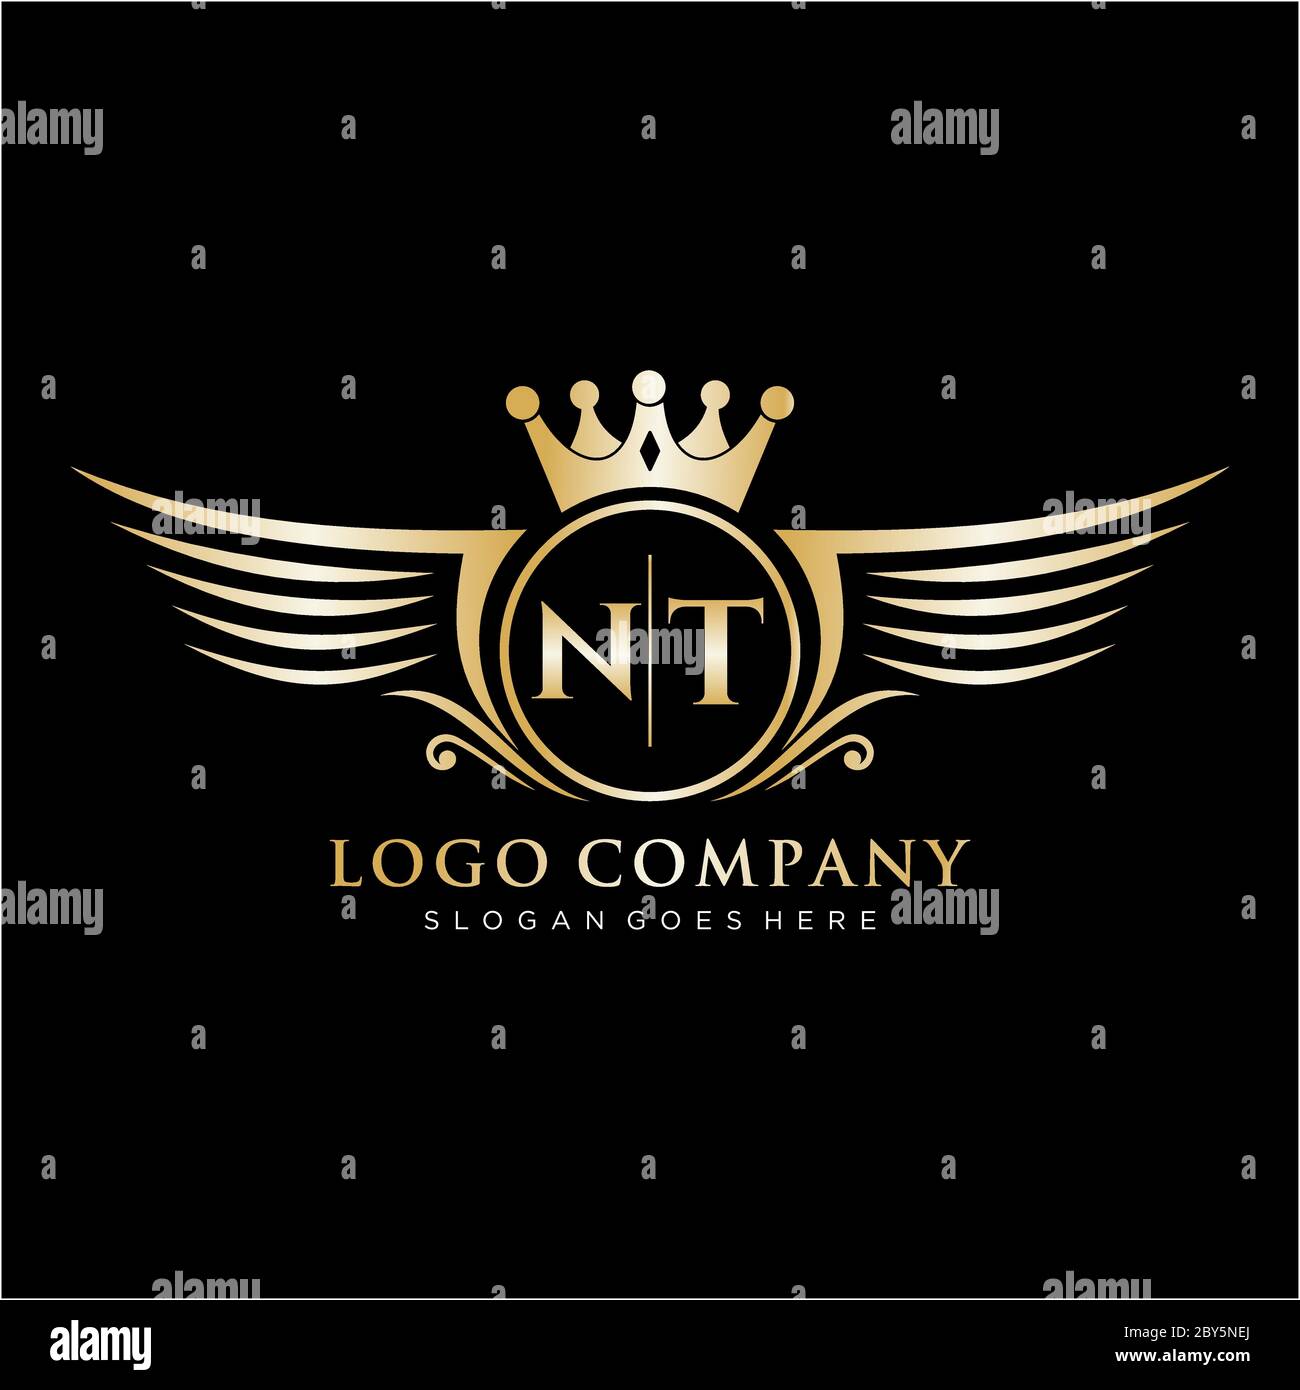 Hotel nt Stock Vector Images - Alamy